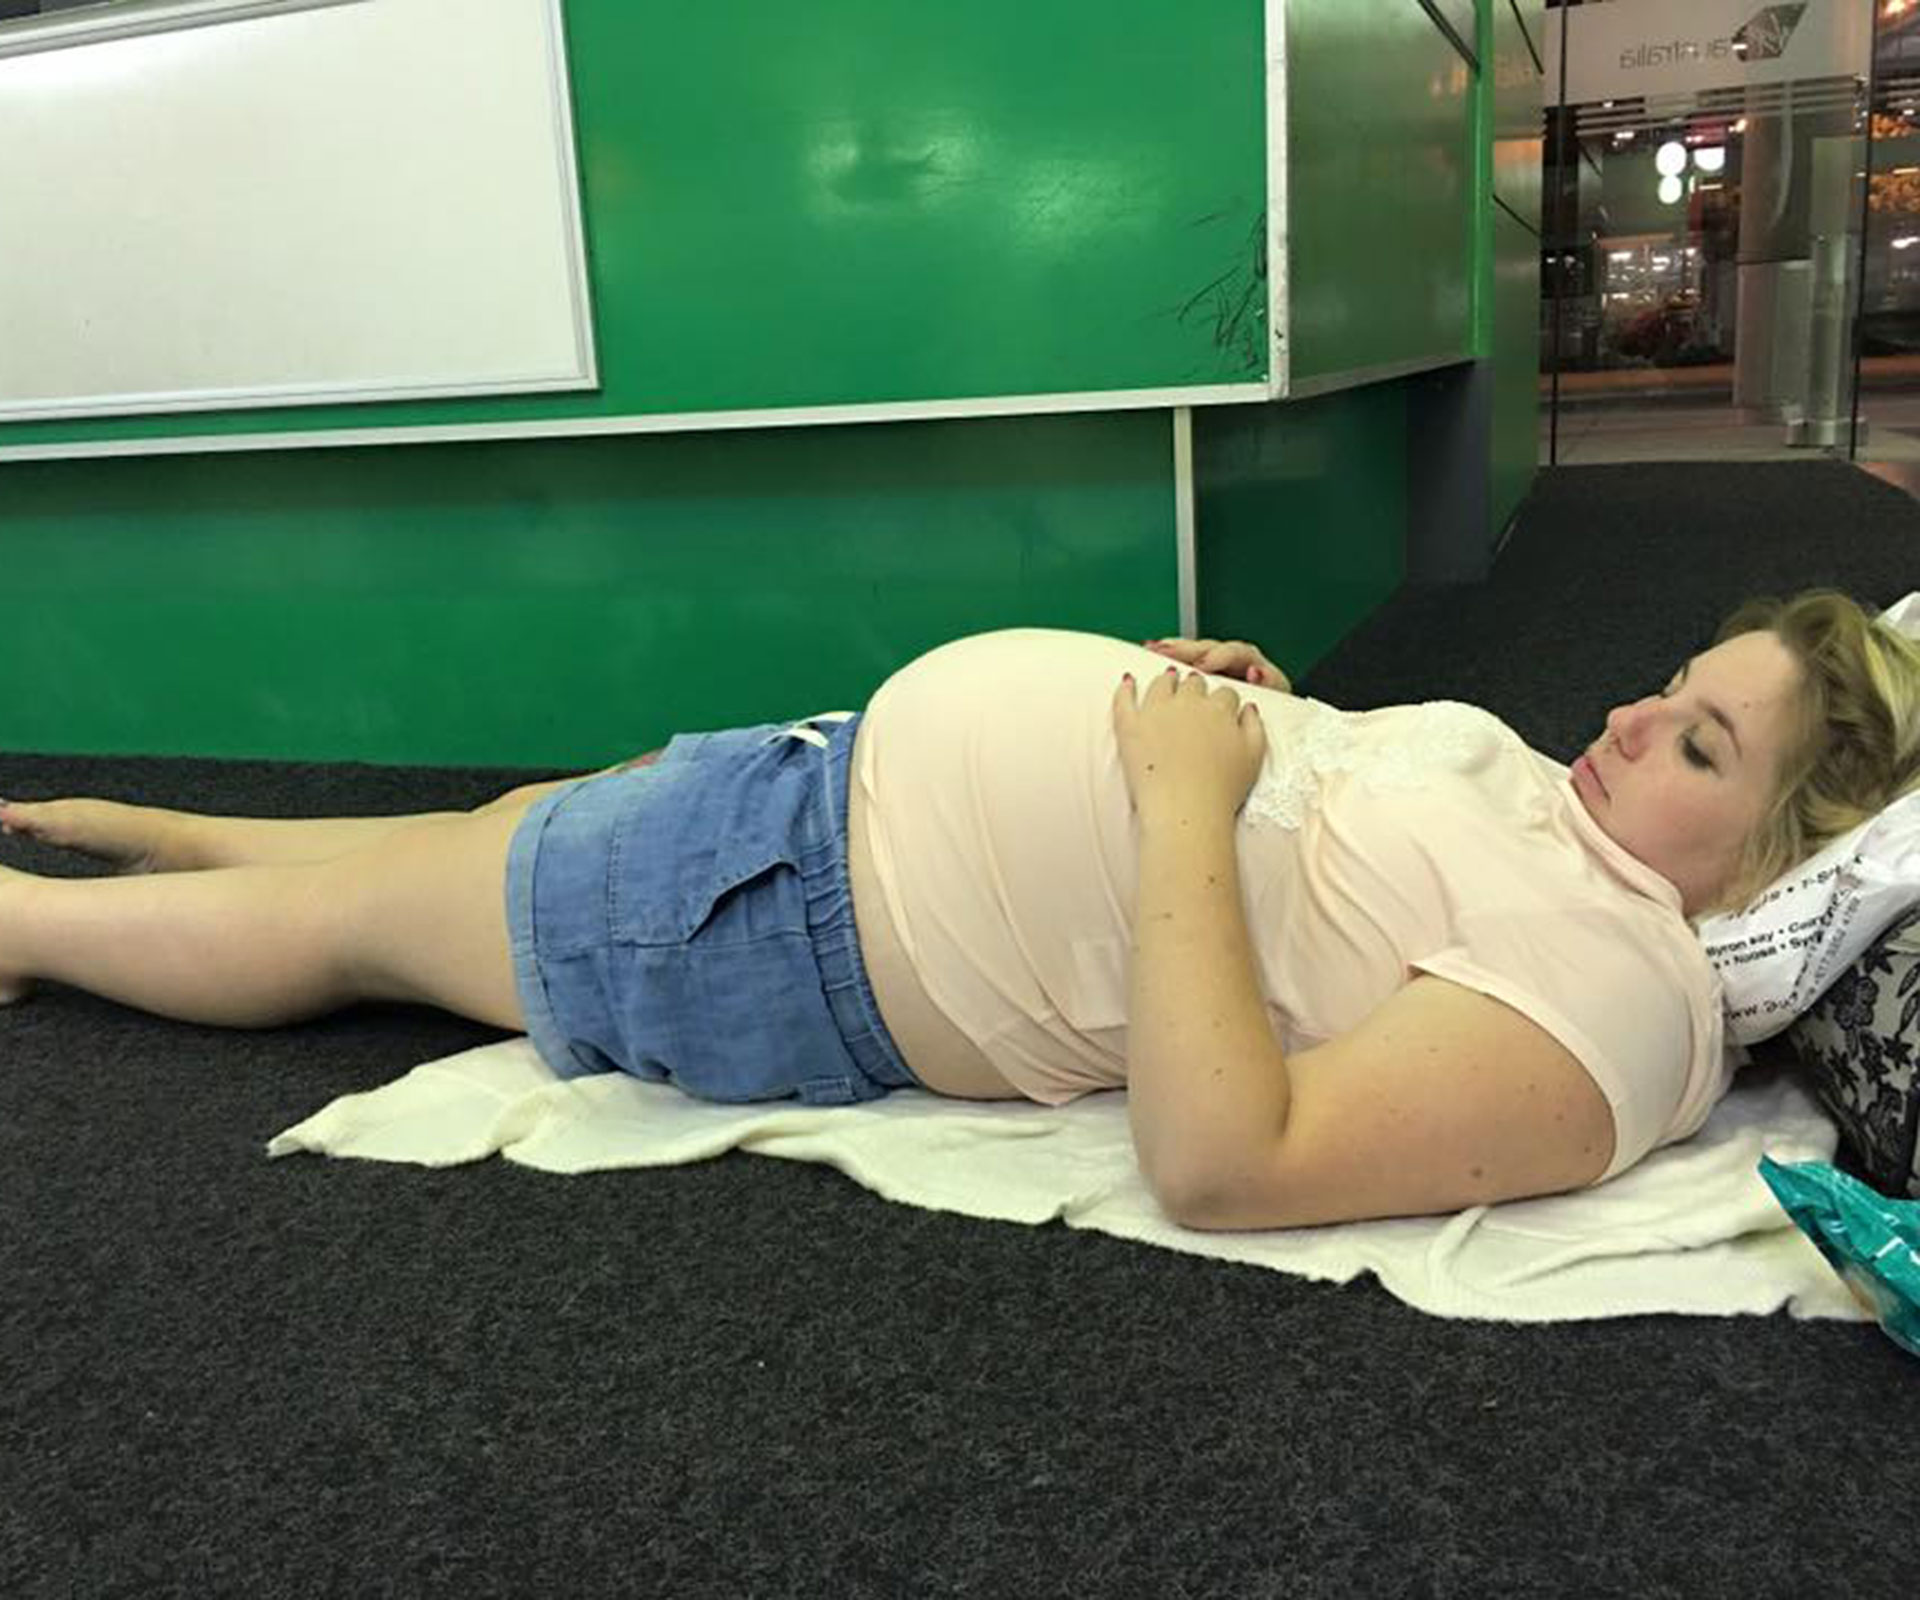 Pregnant woman forced to sleep on airport floor